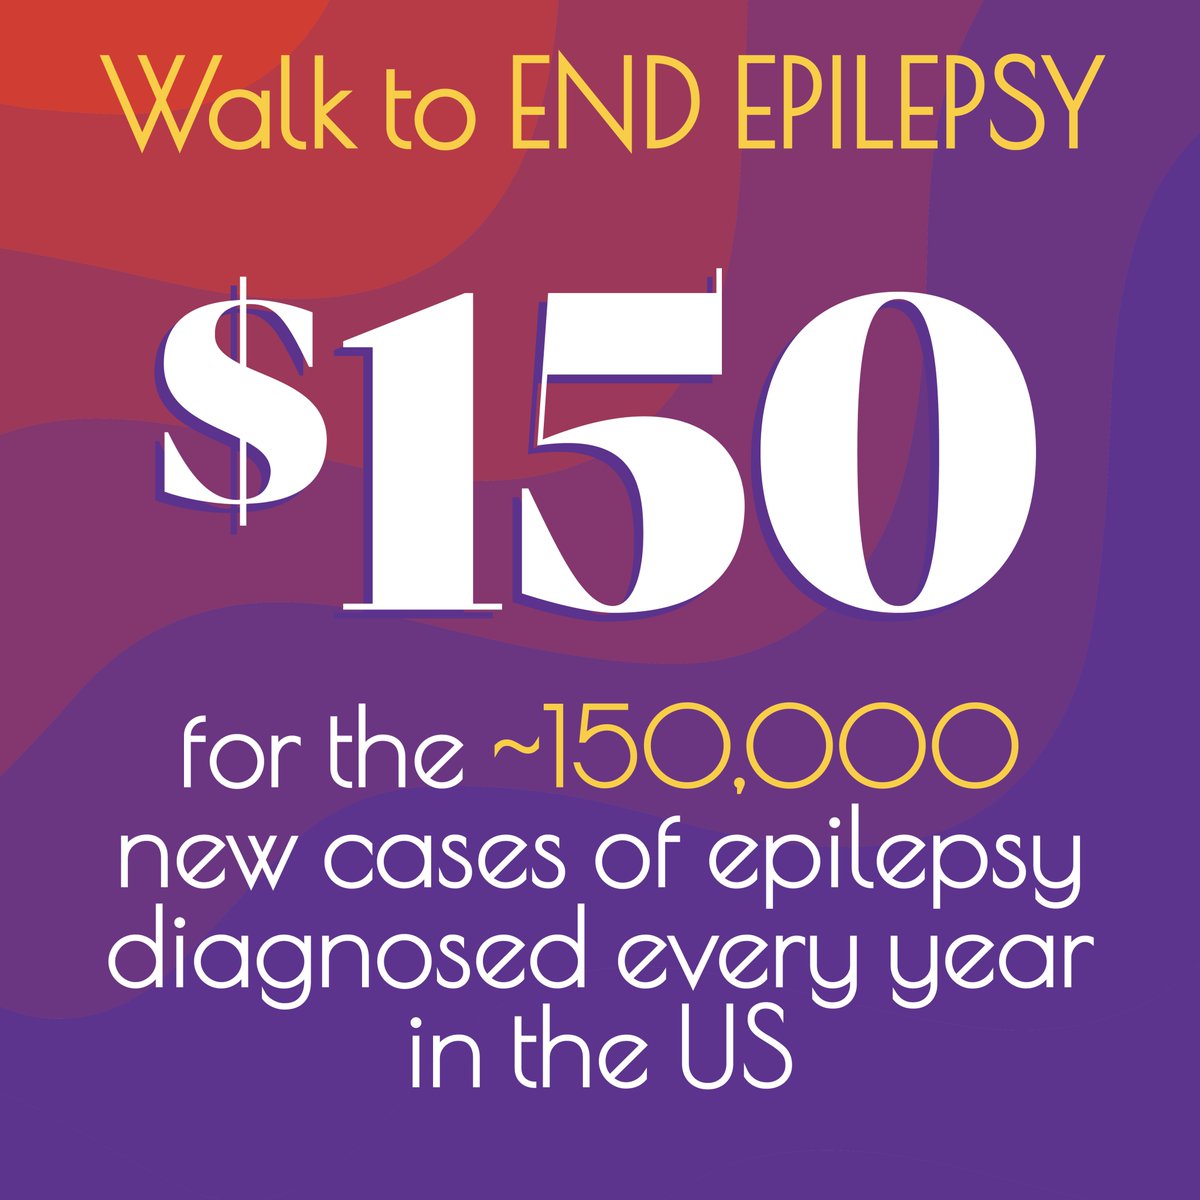 In honor of #FundraiserFriday consider making a donation or asking for a gift before tomorrow morning that represents those affected by epilepsy across our region.

These final gifts can push your fundraising into high gear one last time before tomorrow morning!